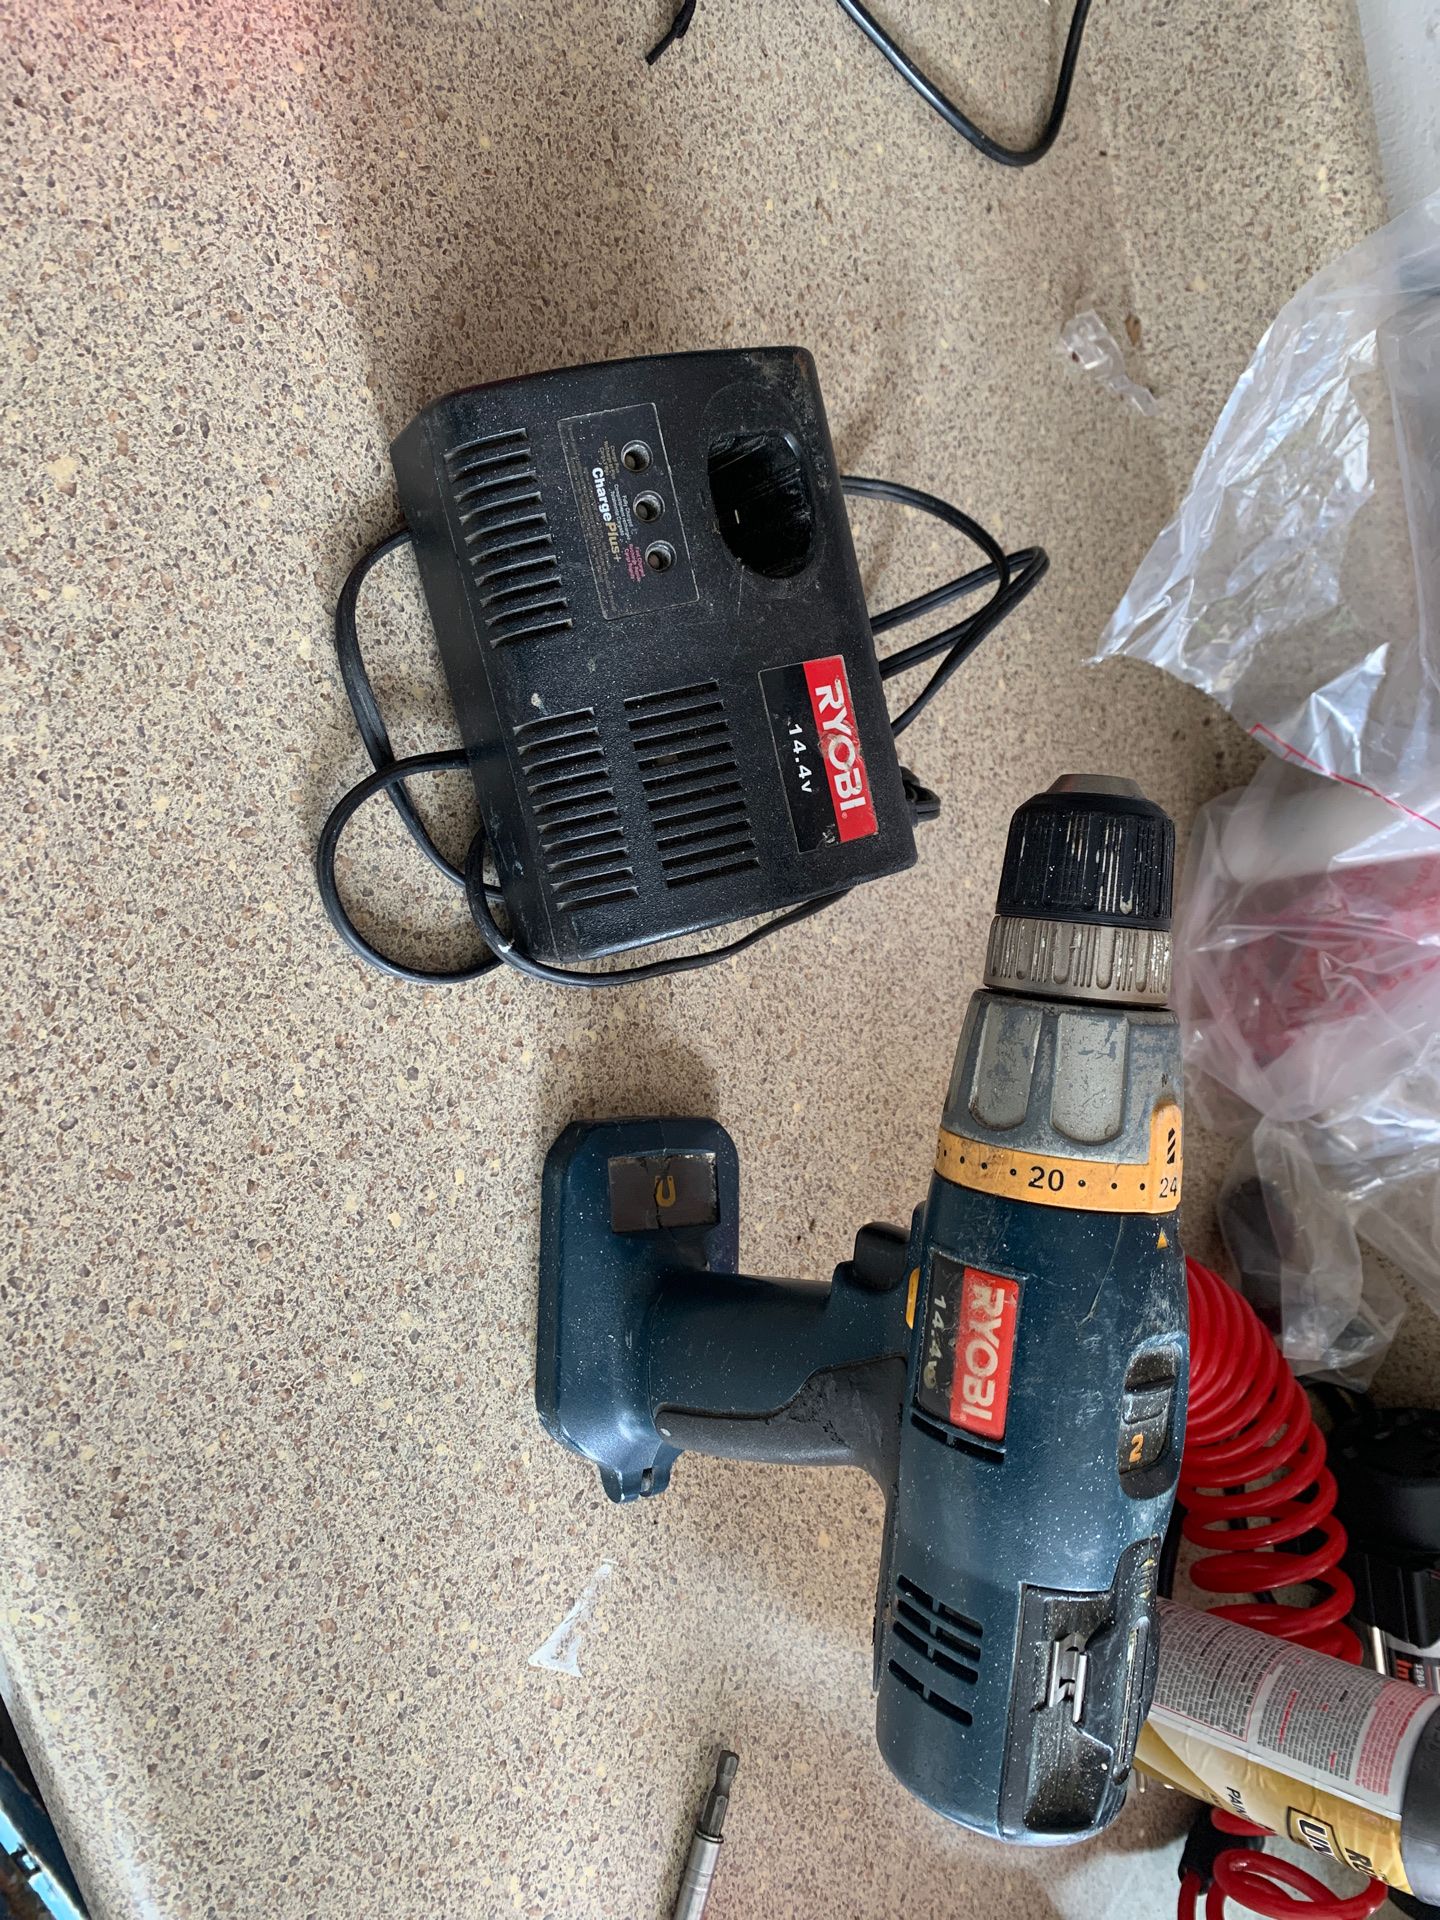 Ryobi drill and charger